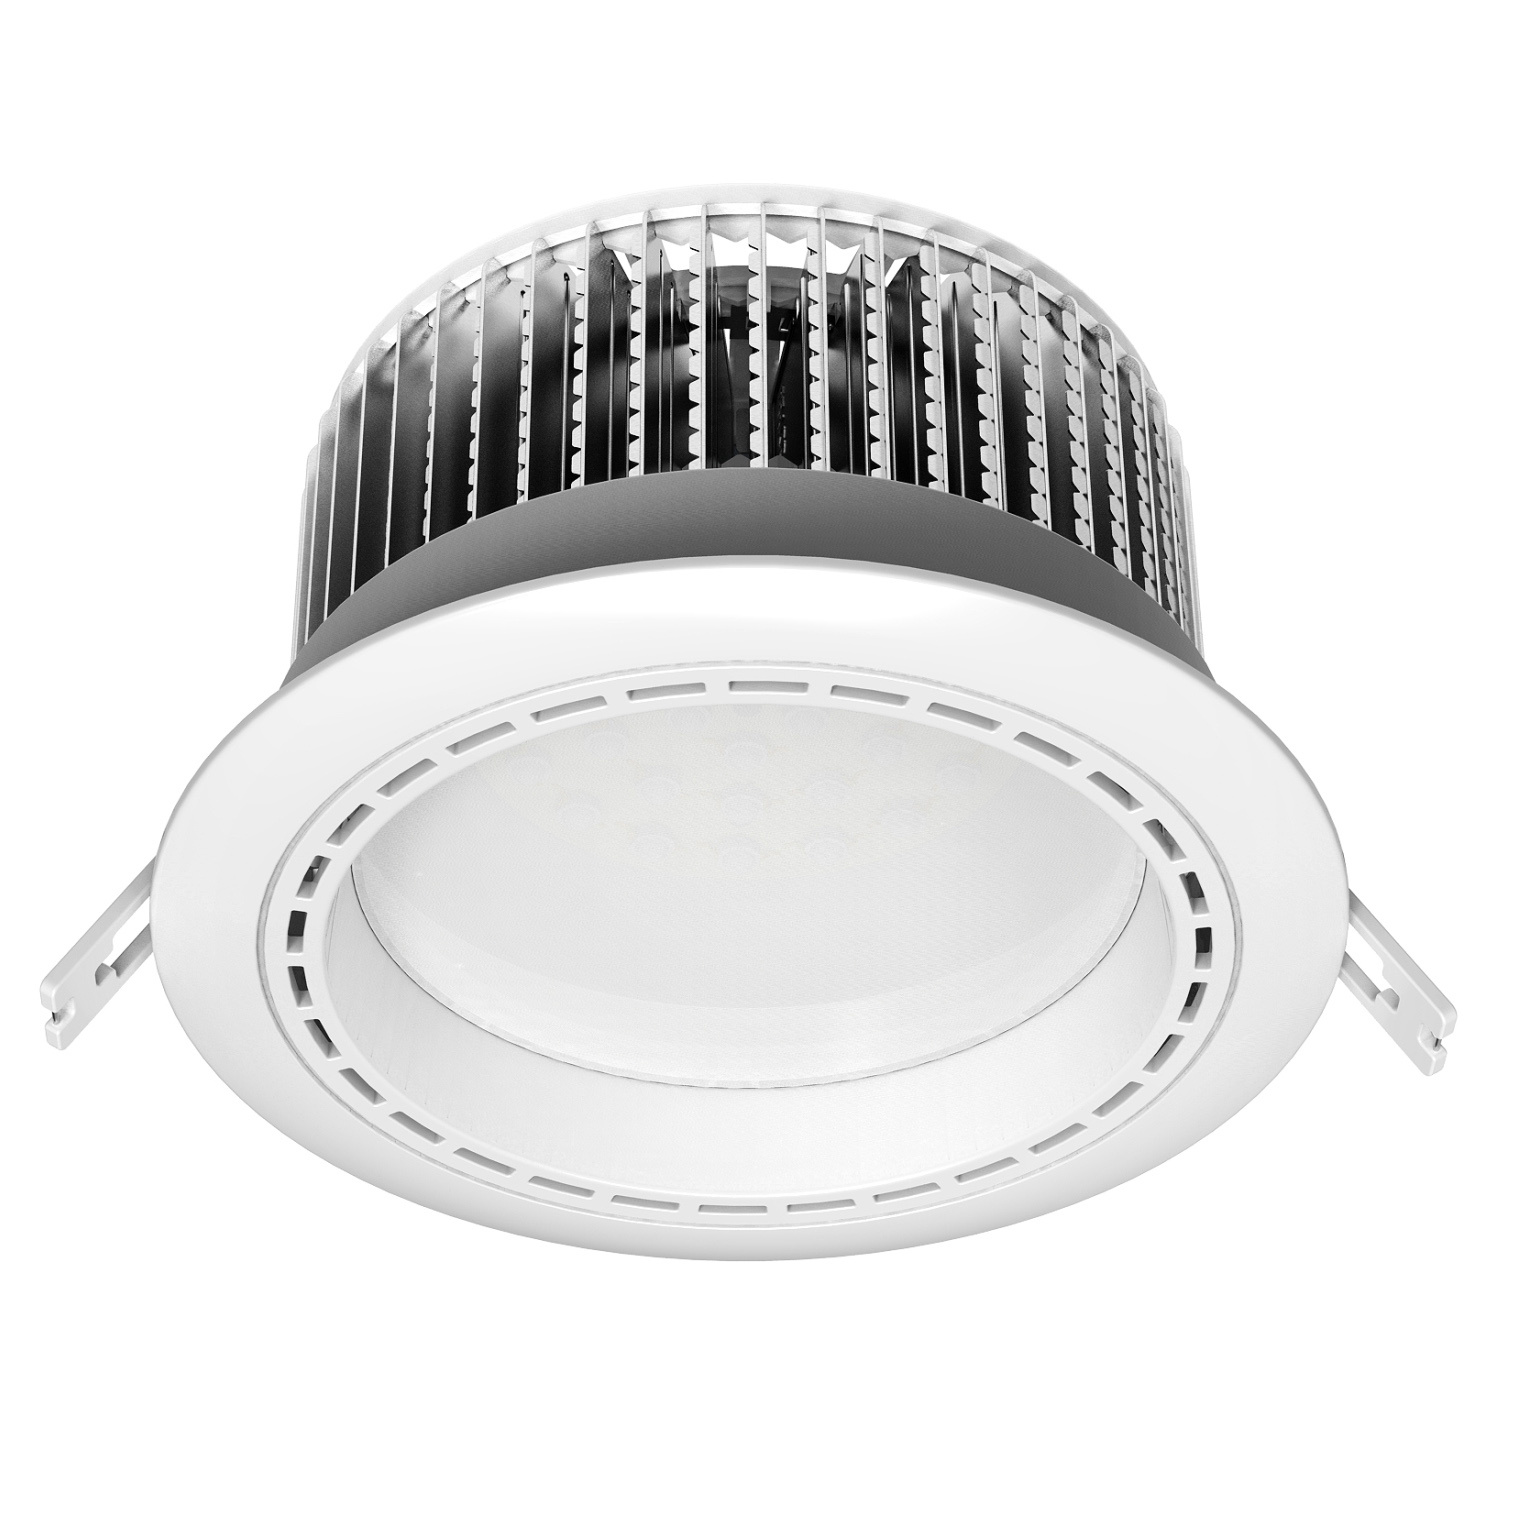 24W High Power LED Ceiling Lights (CL-CL-24W-01)